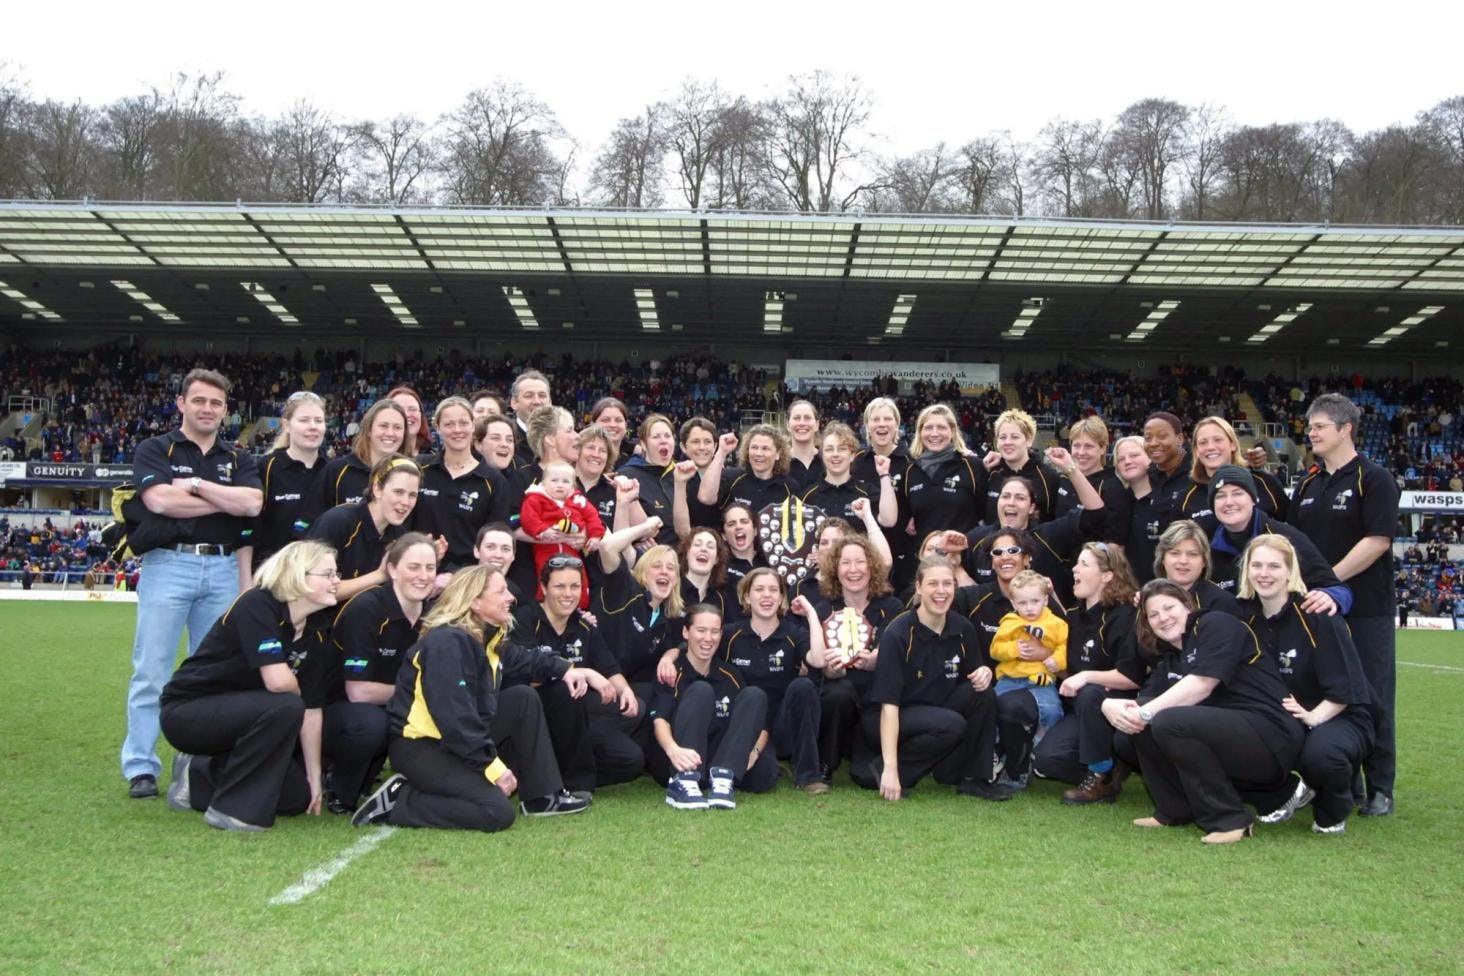 Both Wasps Women's Rugby Teams after winning National League 2004